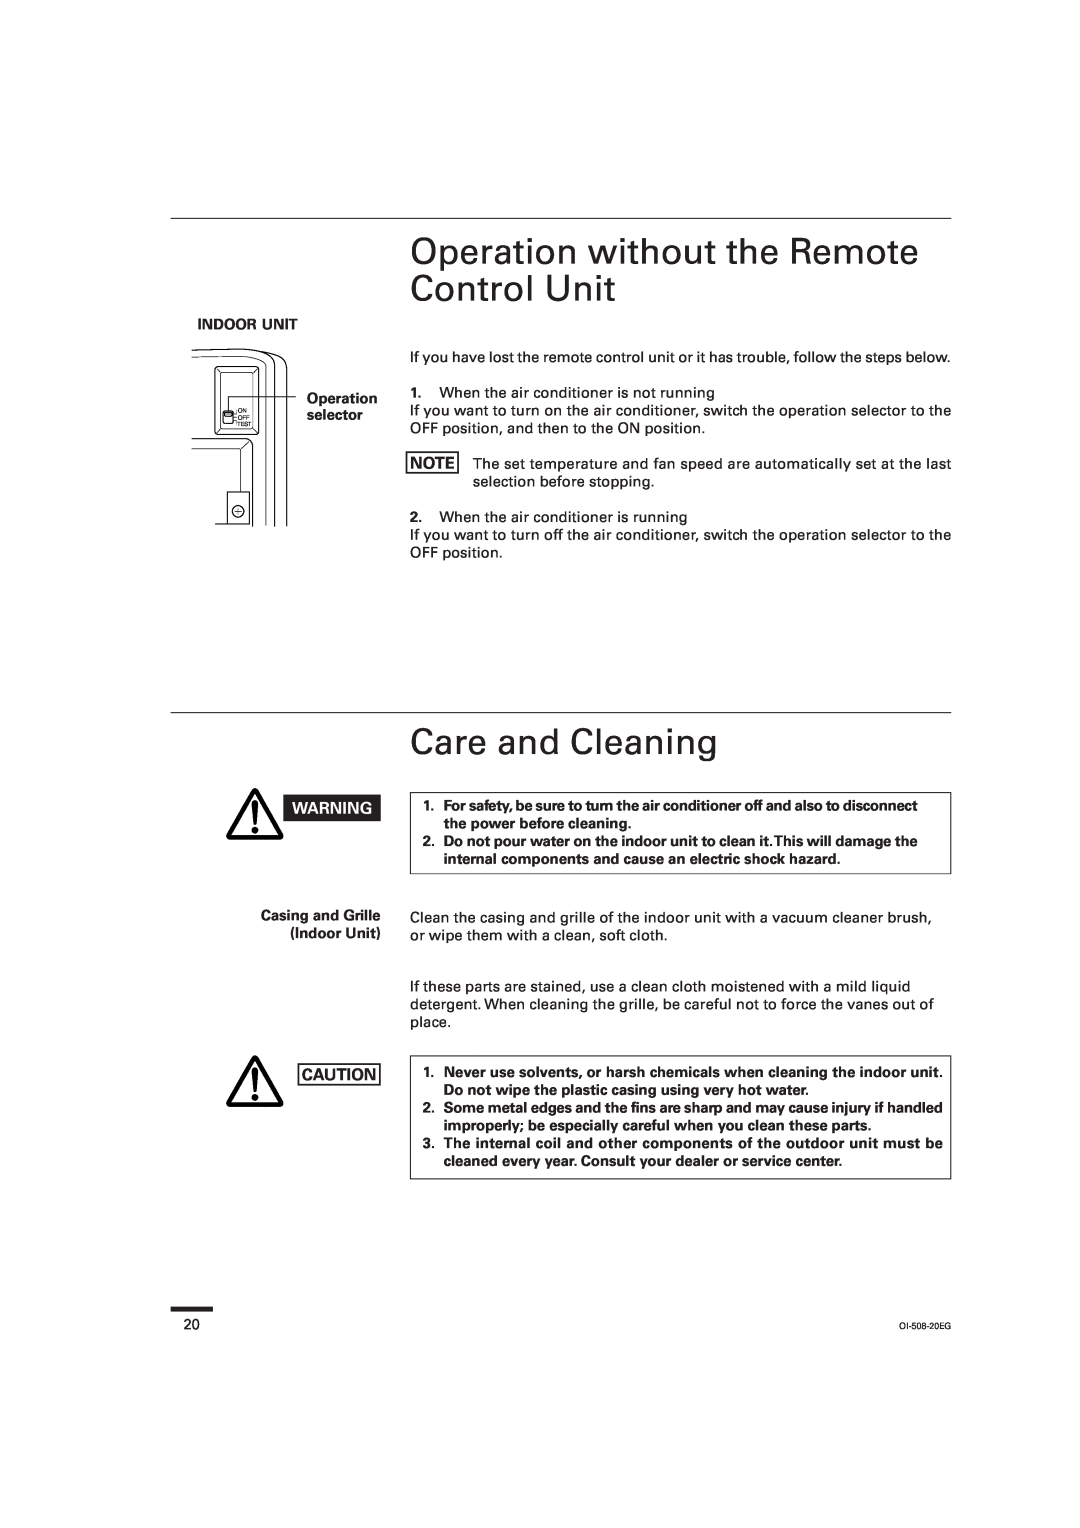 Sanyo KS2462R Operation without the Remote Control Unit, Care and Cleaning, INDOOR UNIT Operation, OFFselector 